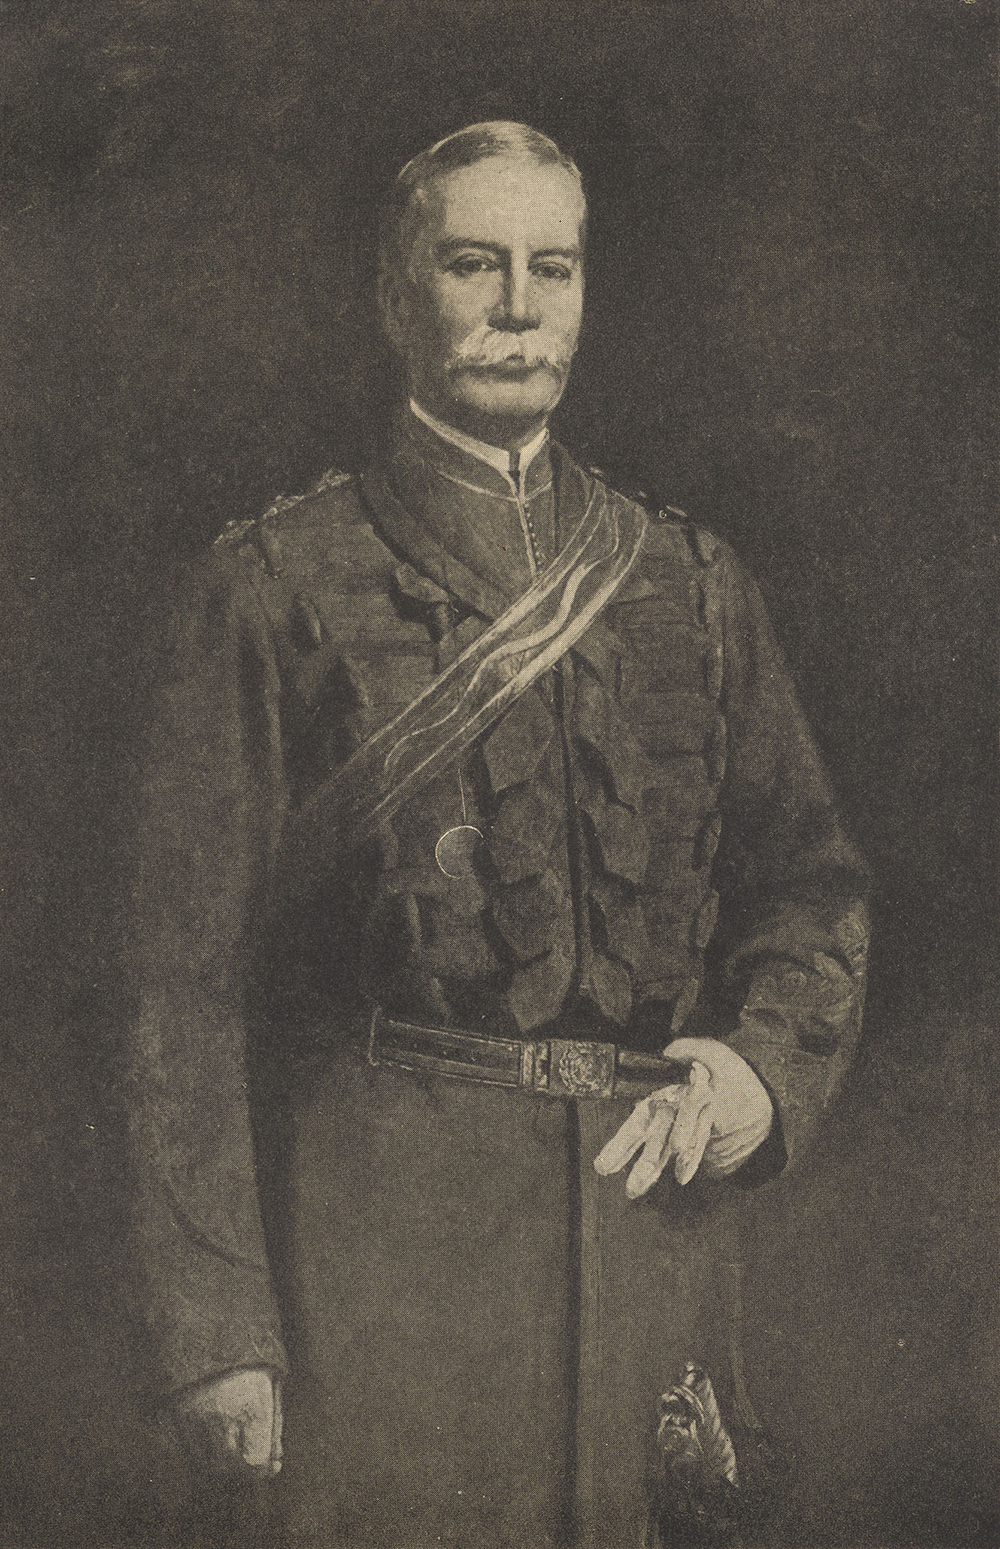 A portrait of Captain James Marshall Grant wearing a formal military outfit. Grant has a sash wrapped around his left shoulder which goes to his right hip. He is wearing a light coloured glove on his left hand which is holding on to his belt and another glove. His right hand is clenched at his side.